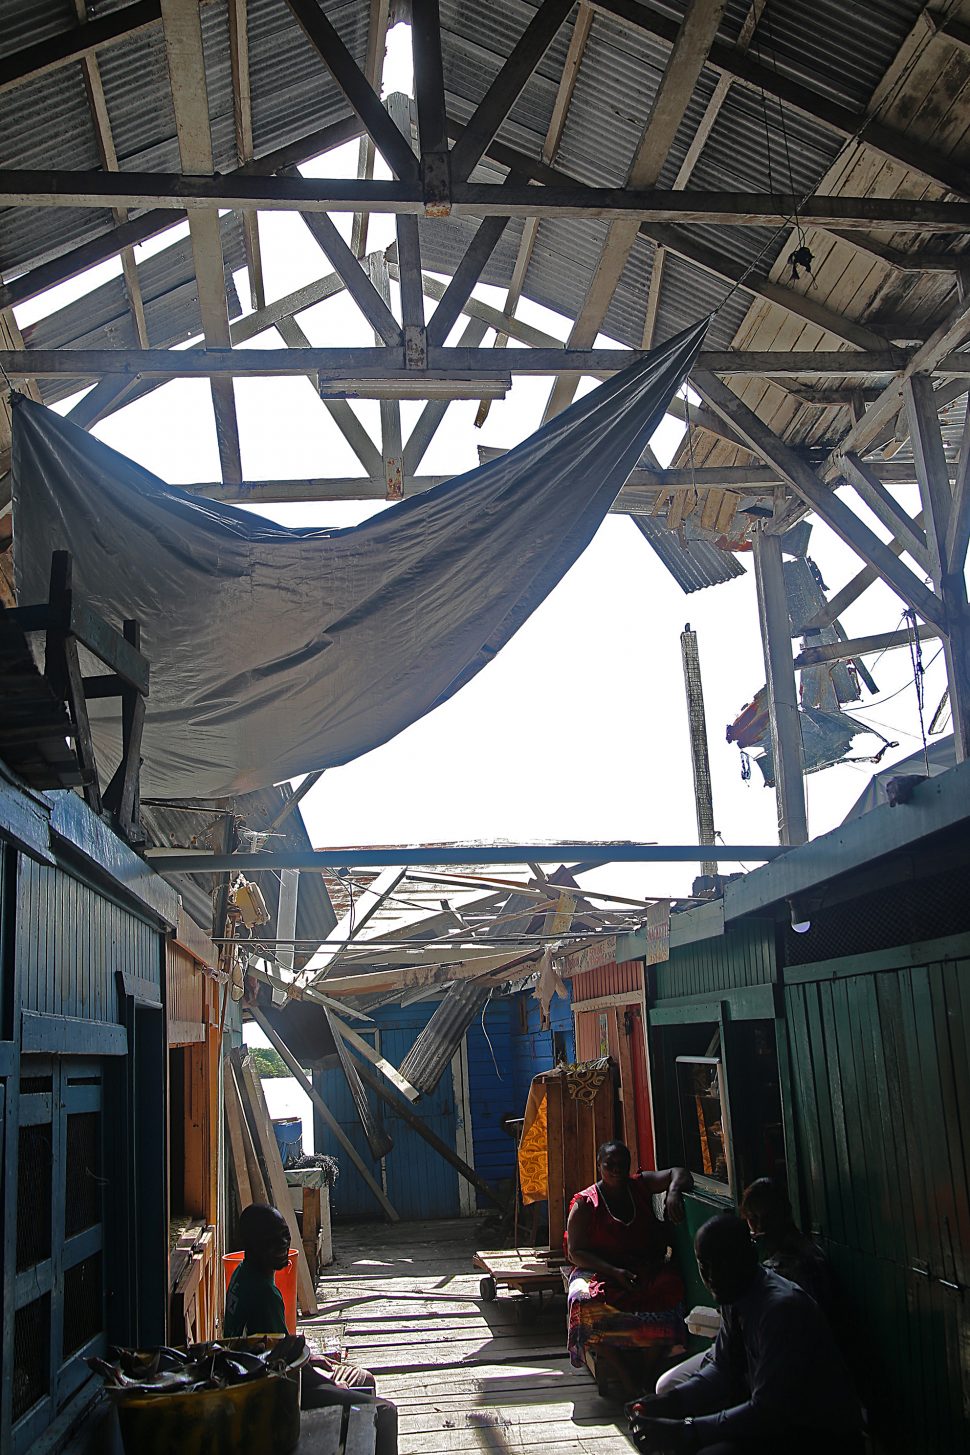 Several zinc sheets resting on vendors’ stalls after falling from the roof.
